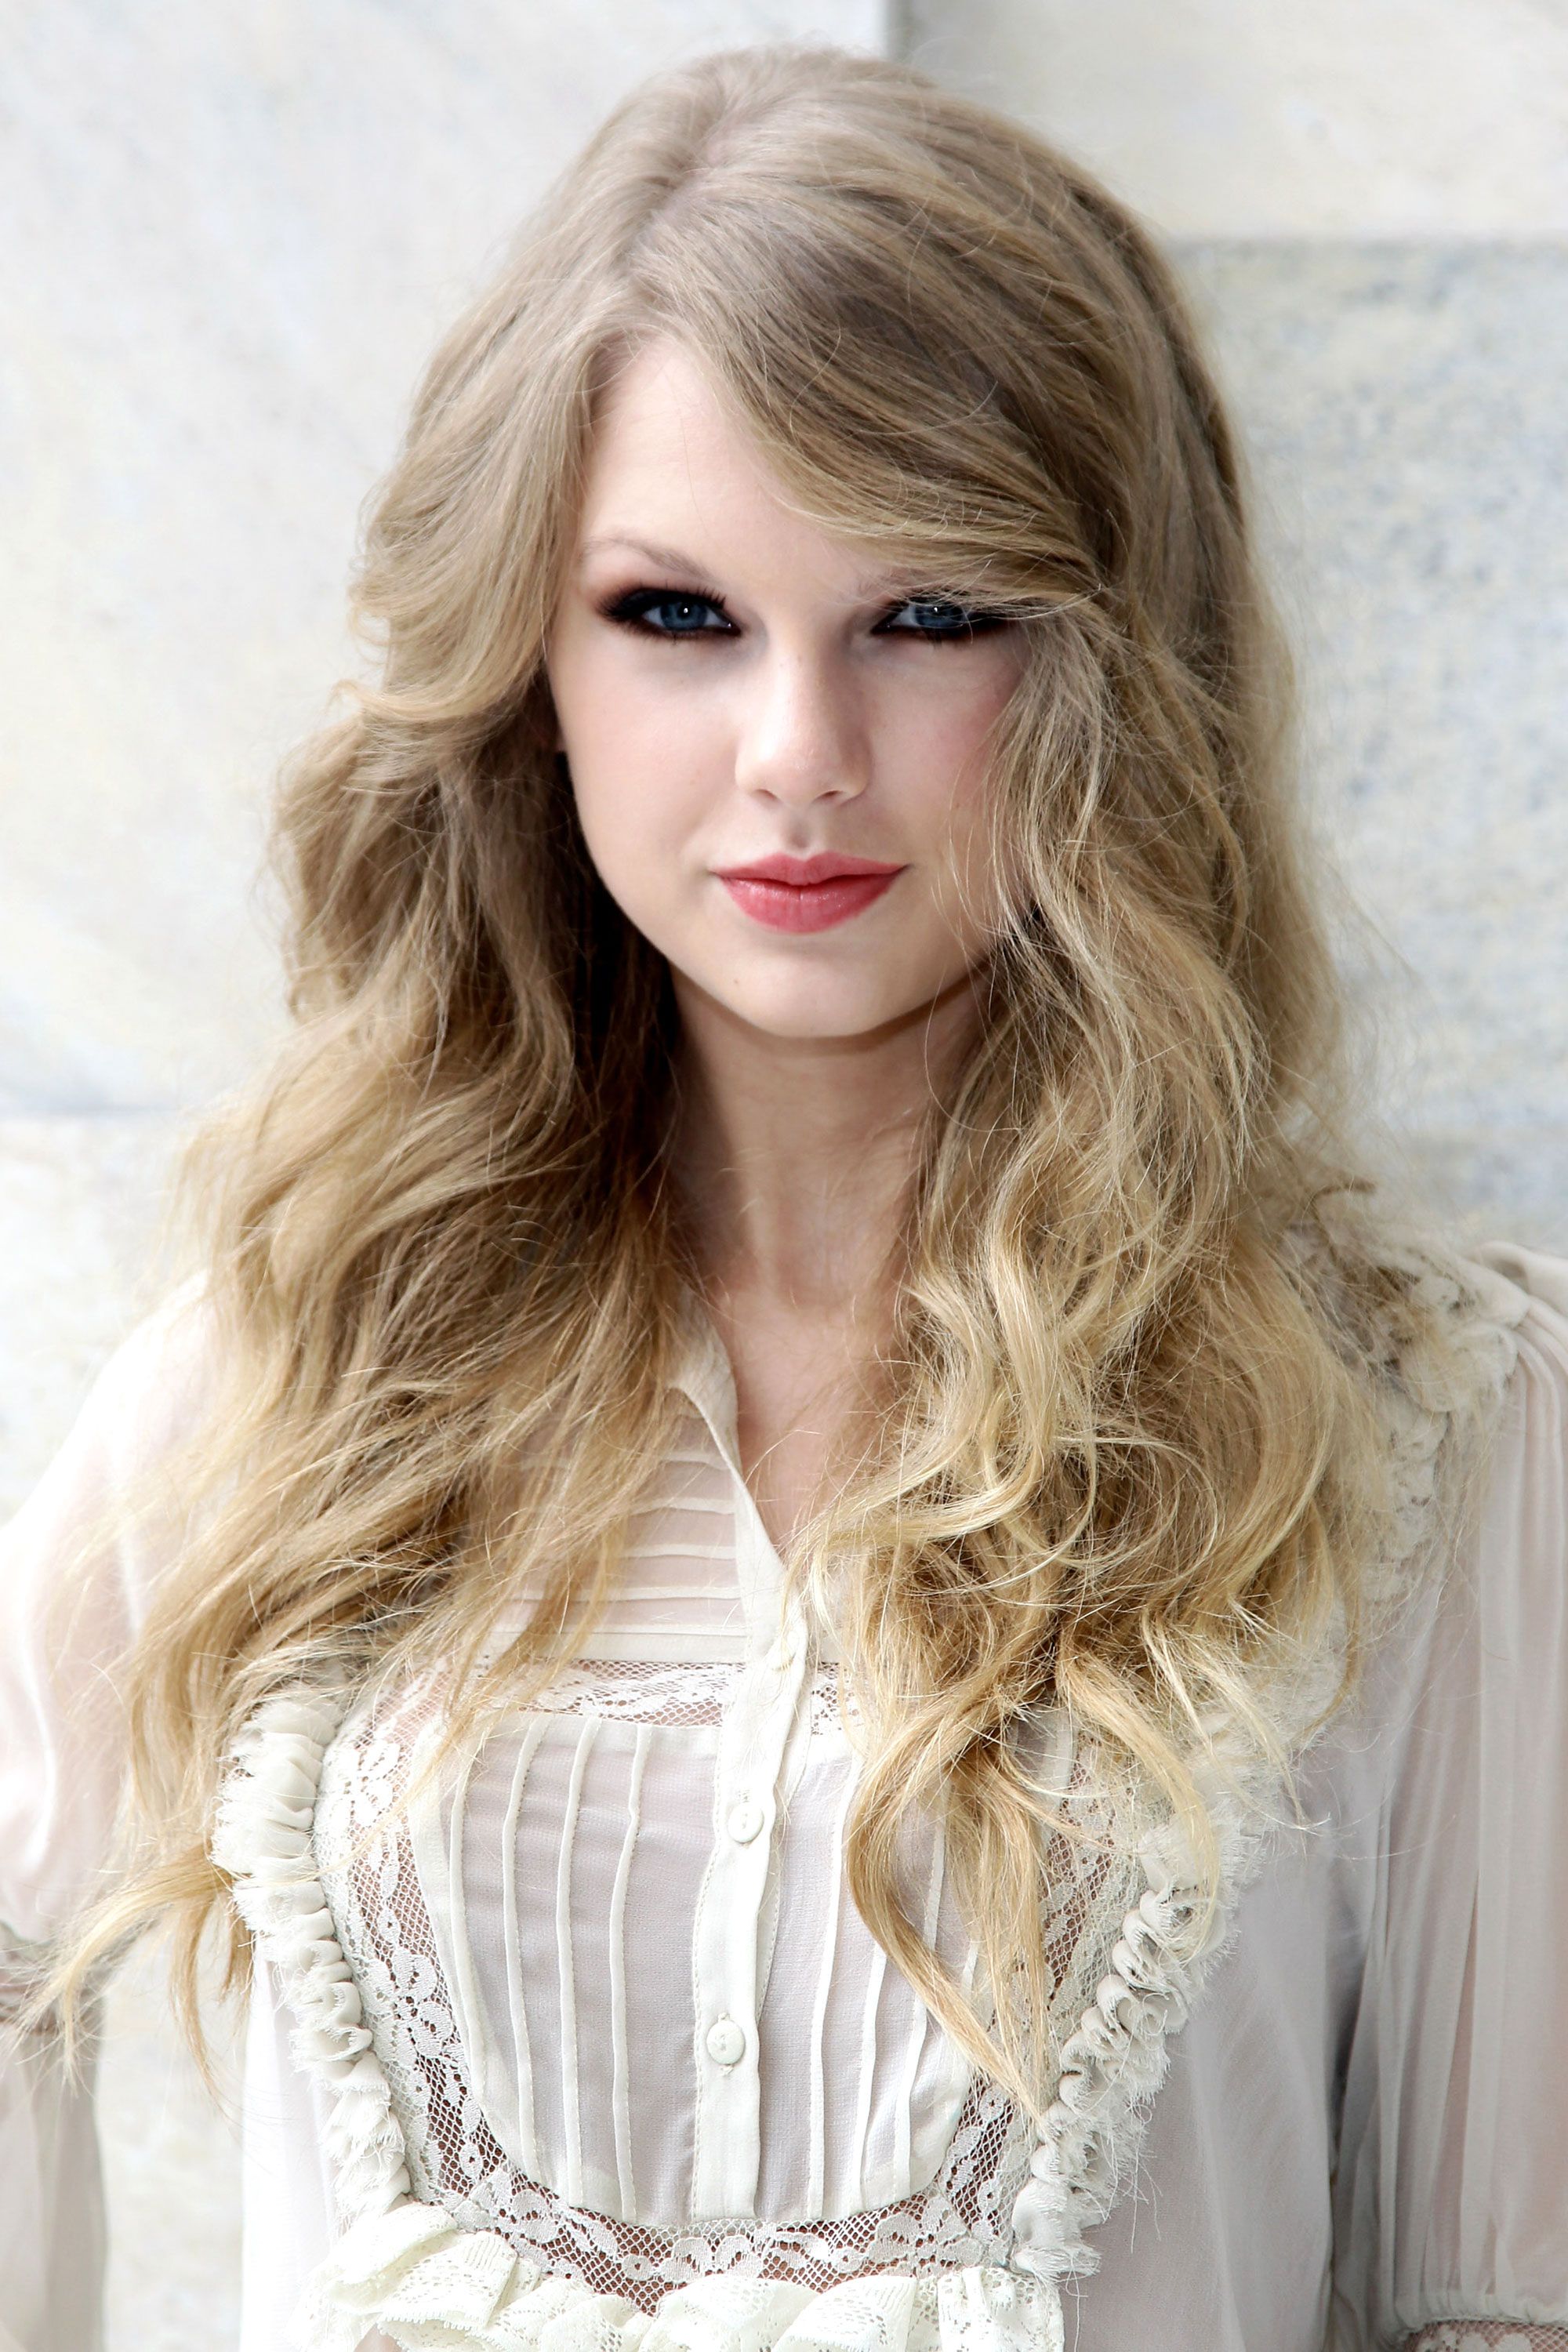 Taylor Swift Hairstyles - Taylor Swift's Curly, Straight, Short, Long Hair